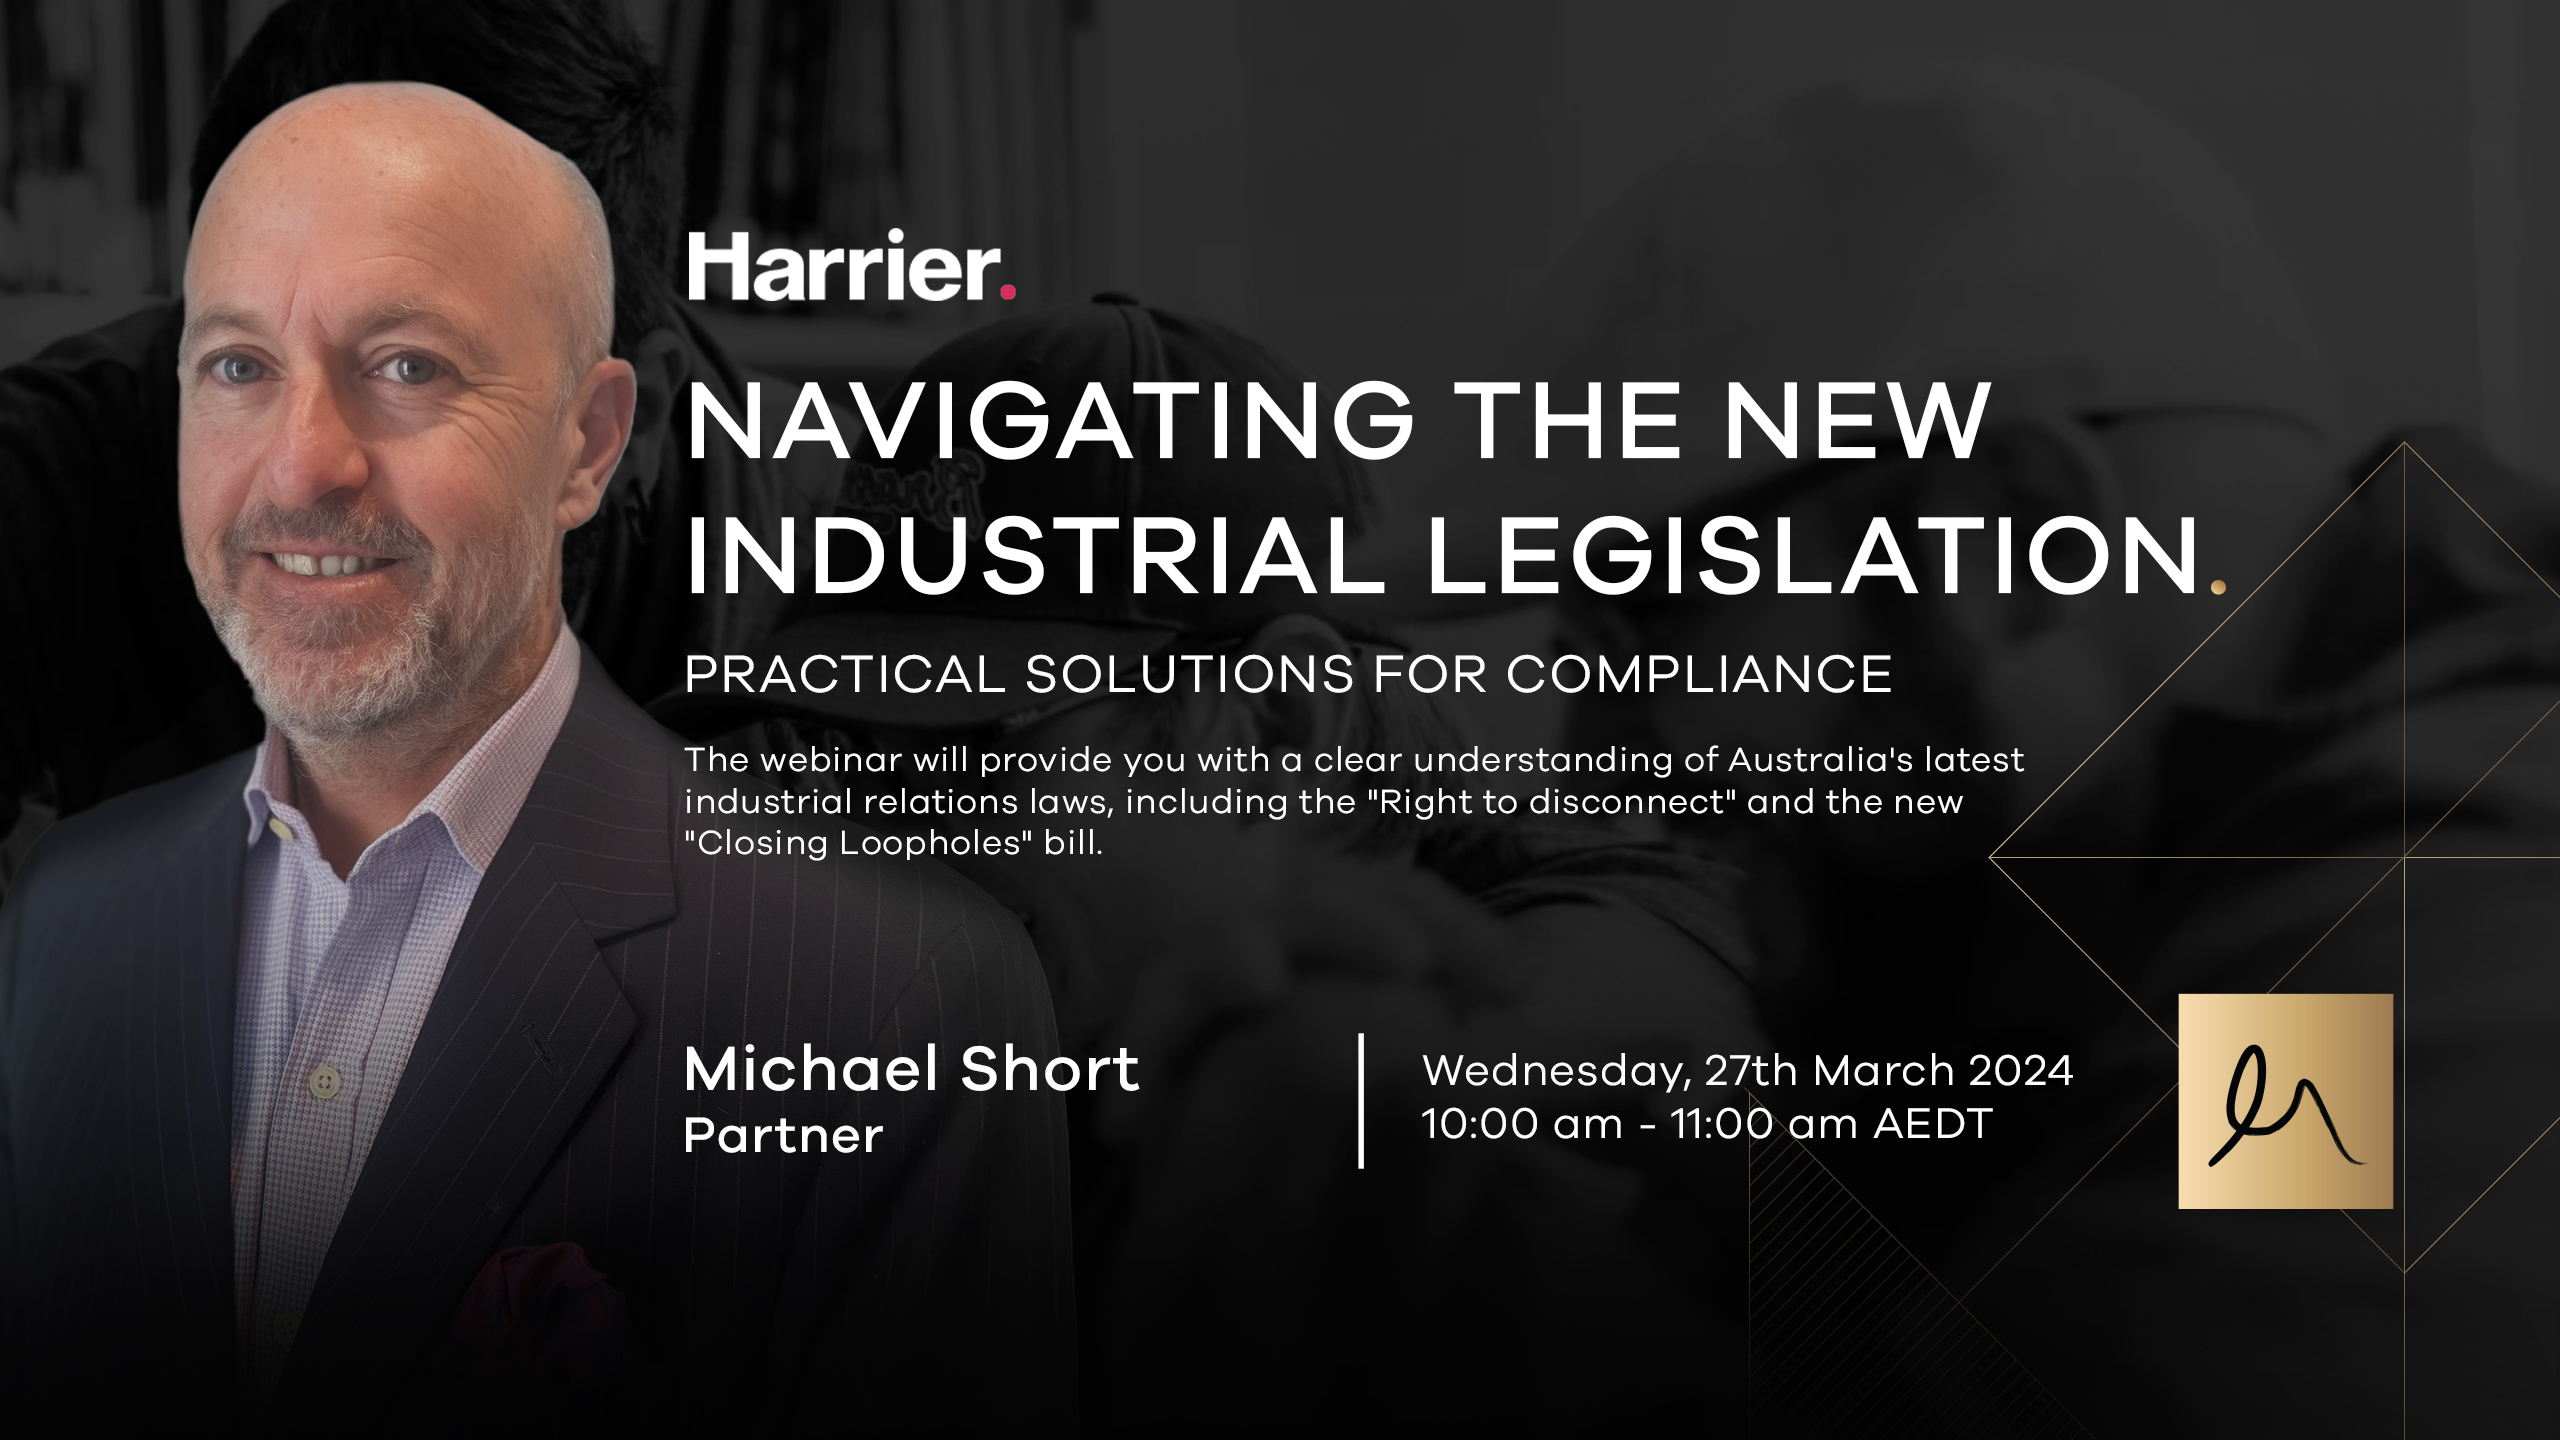 Stay Ahead of the Curve: Join Our Upcoming Webinar on Navigating New Industrial Legislation